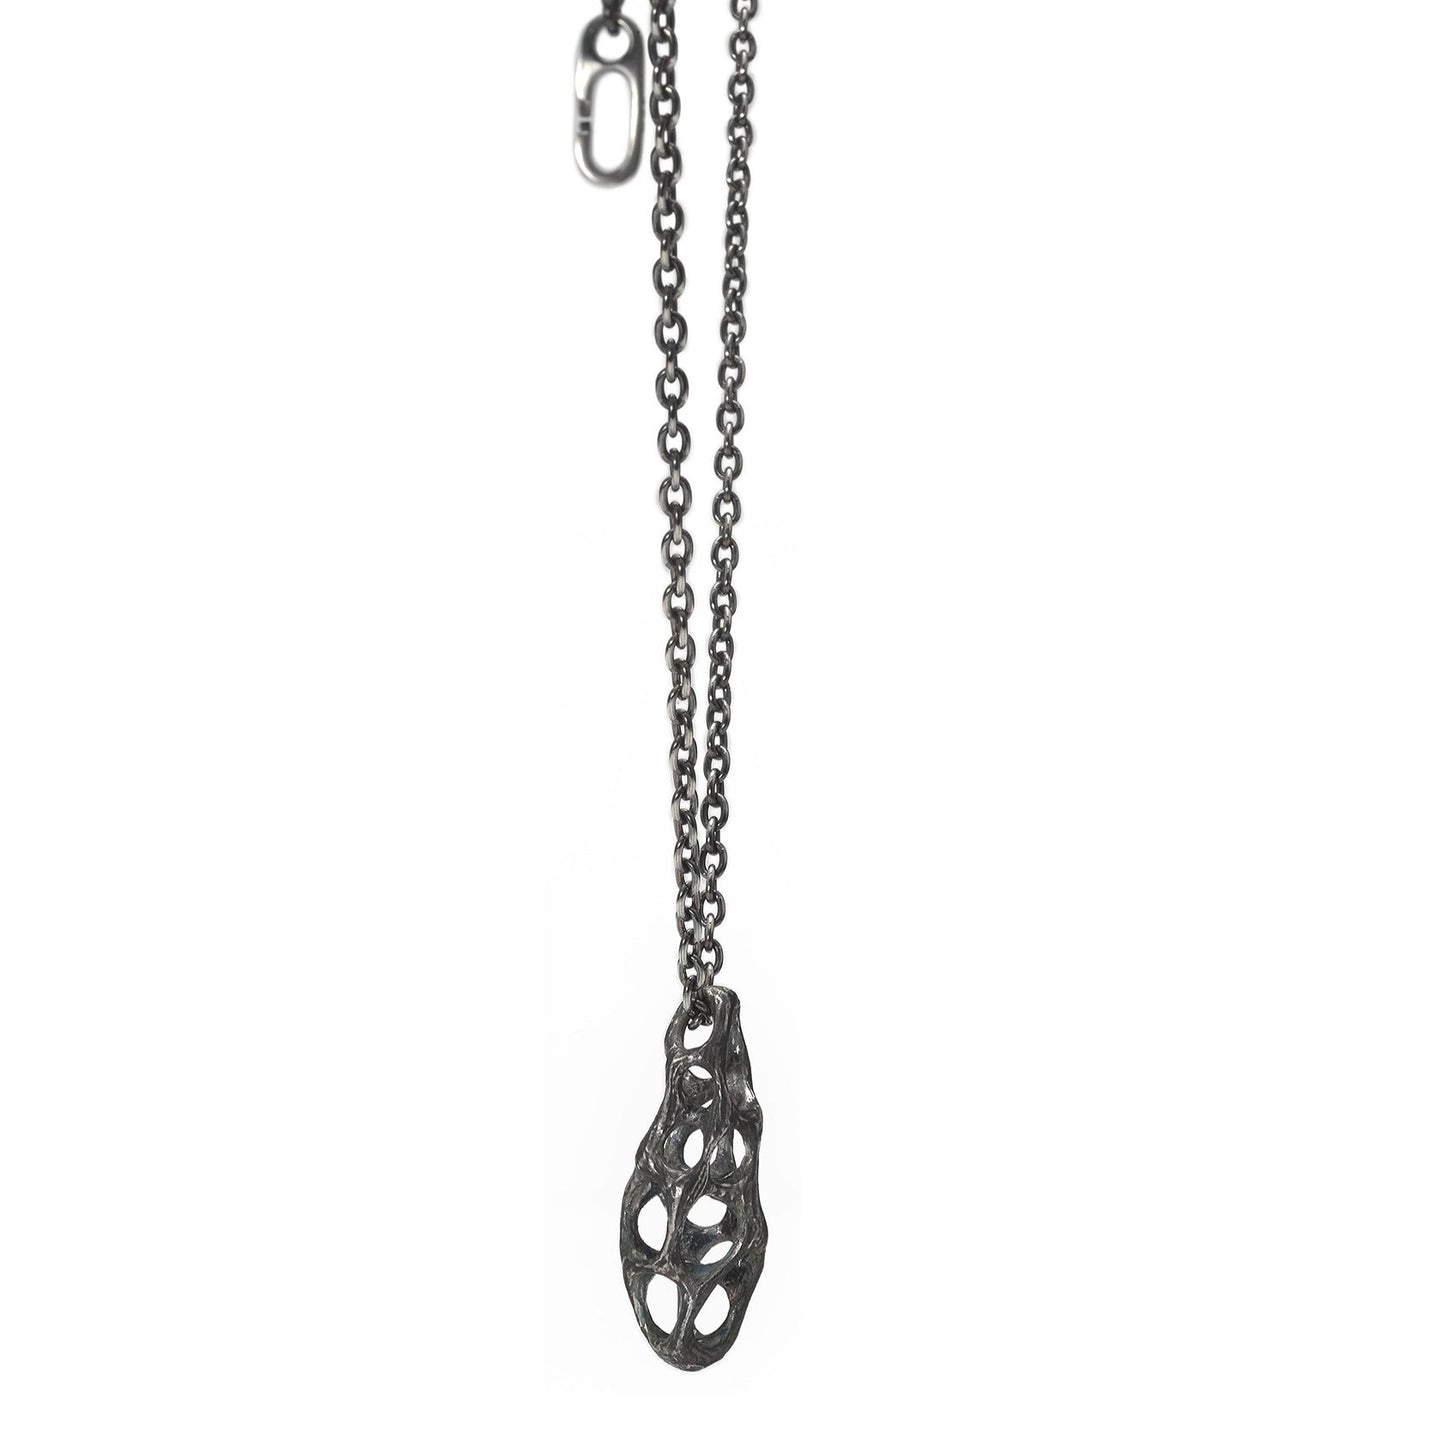 P-61 hollows - Silver necklace with original clasp of 60cm